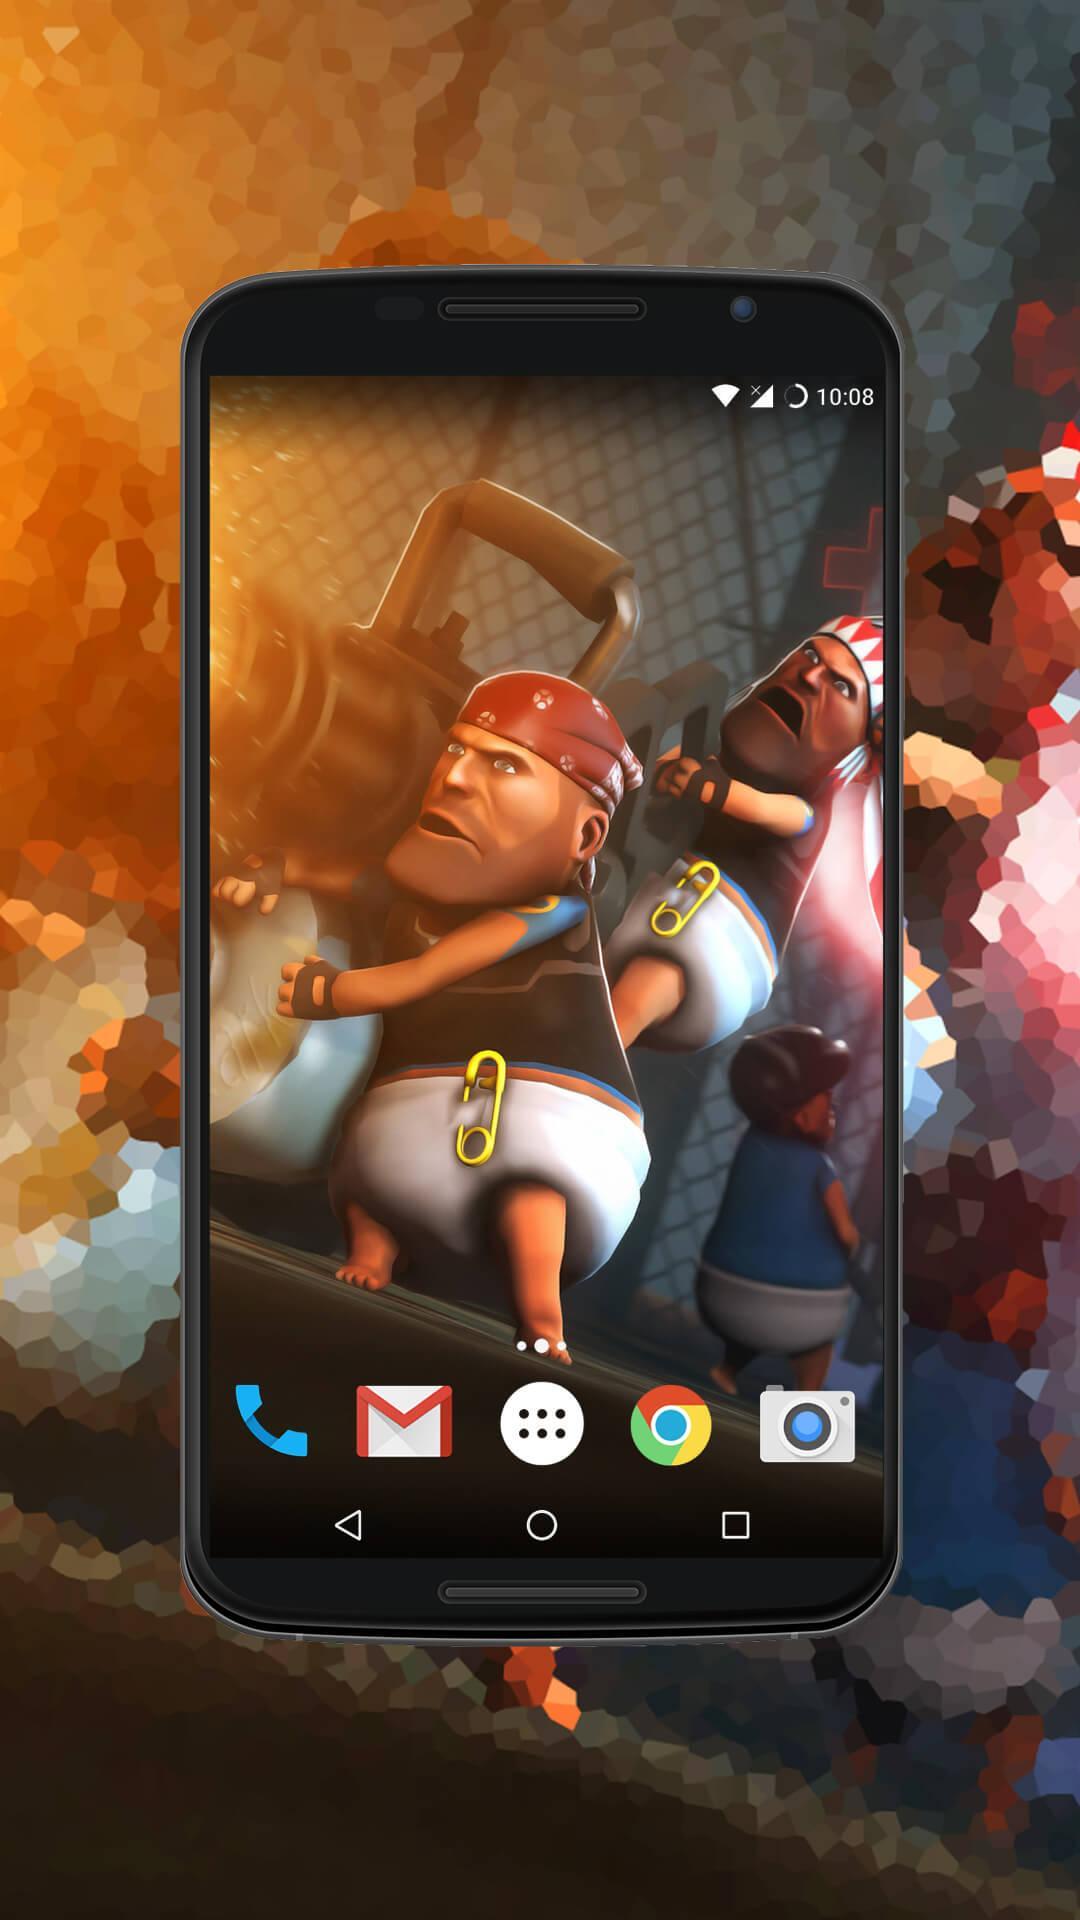 Team Fortress 2 Wallpapers For Android Apk Download - team fortress 2 poster roblox